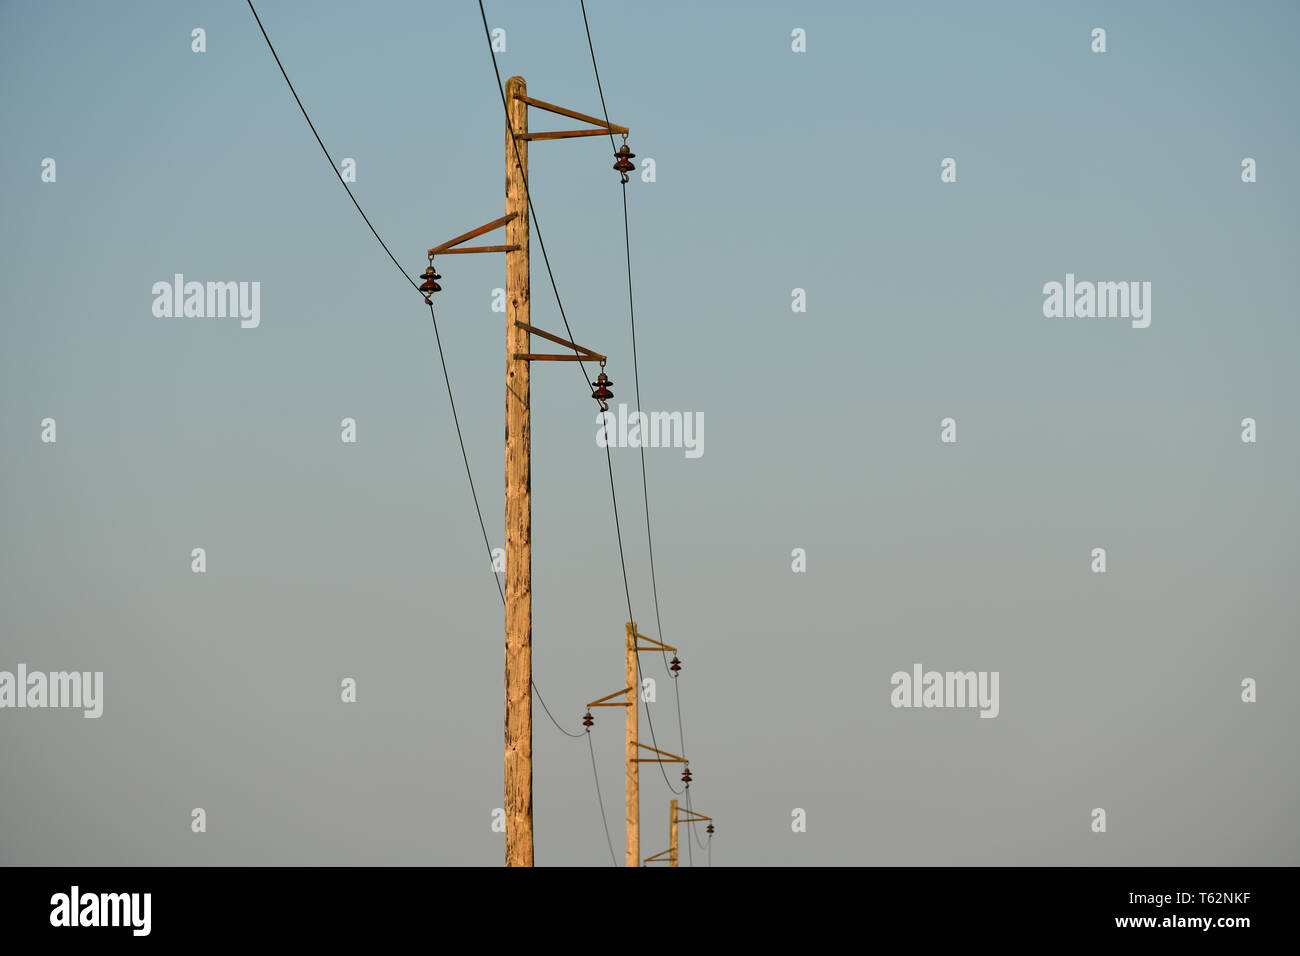 Electric pole and wires. An old overhead power line and single wood utility pole structure. Electrical power transmission and distribution cables. Stock Photo